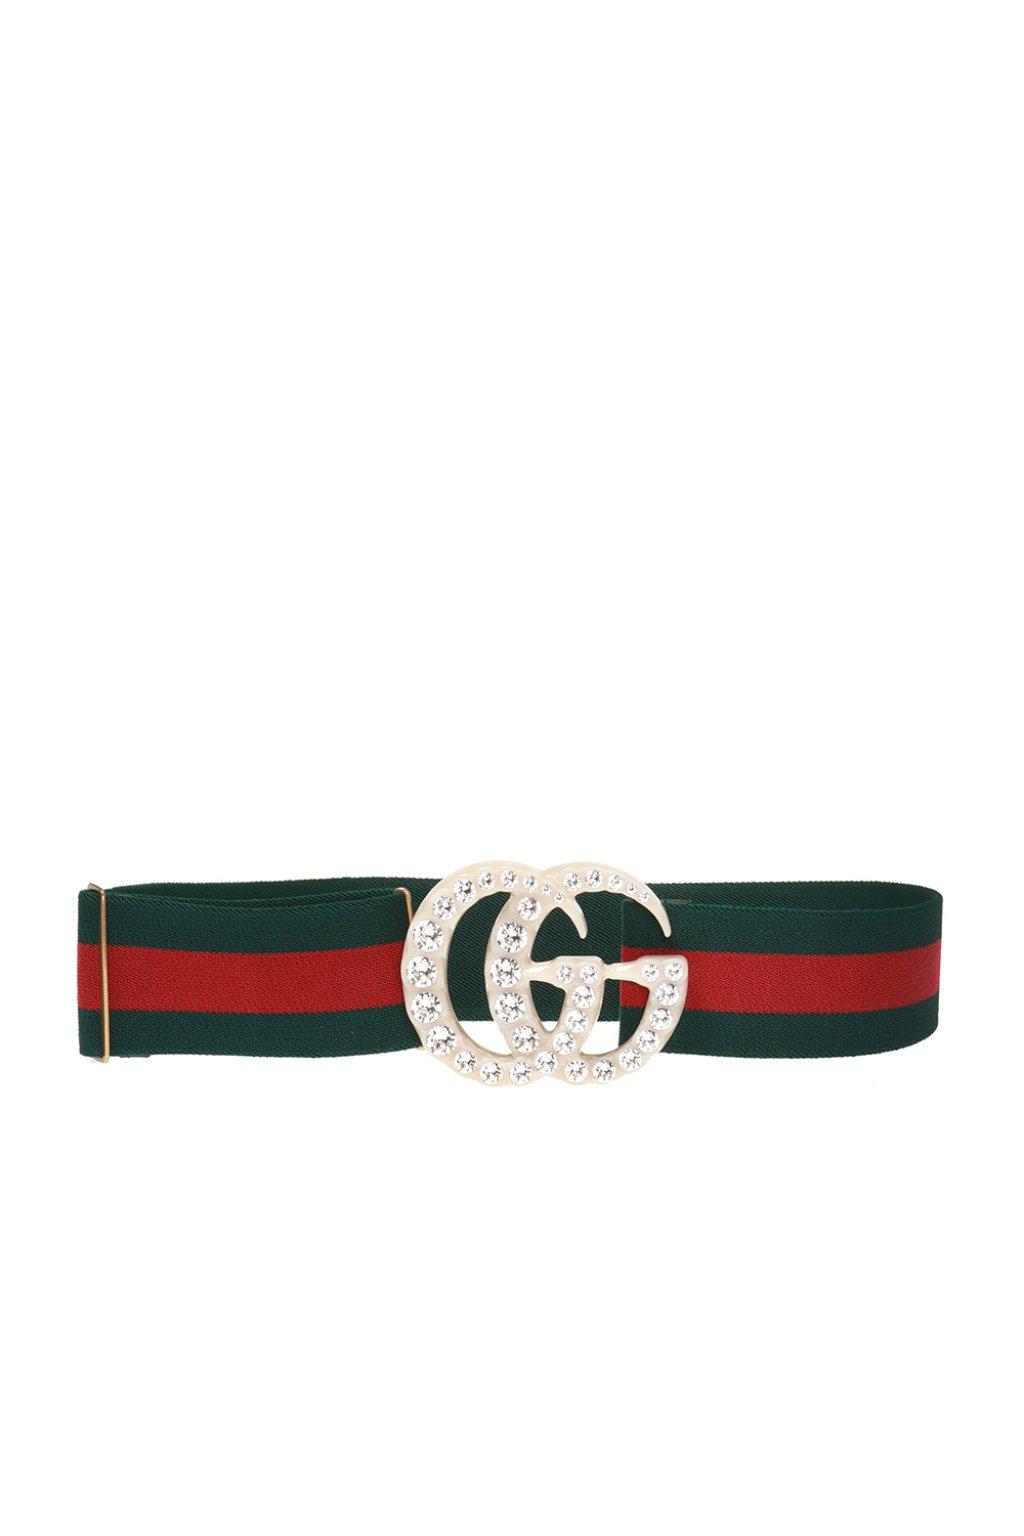 gucci belt red and green black buckle